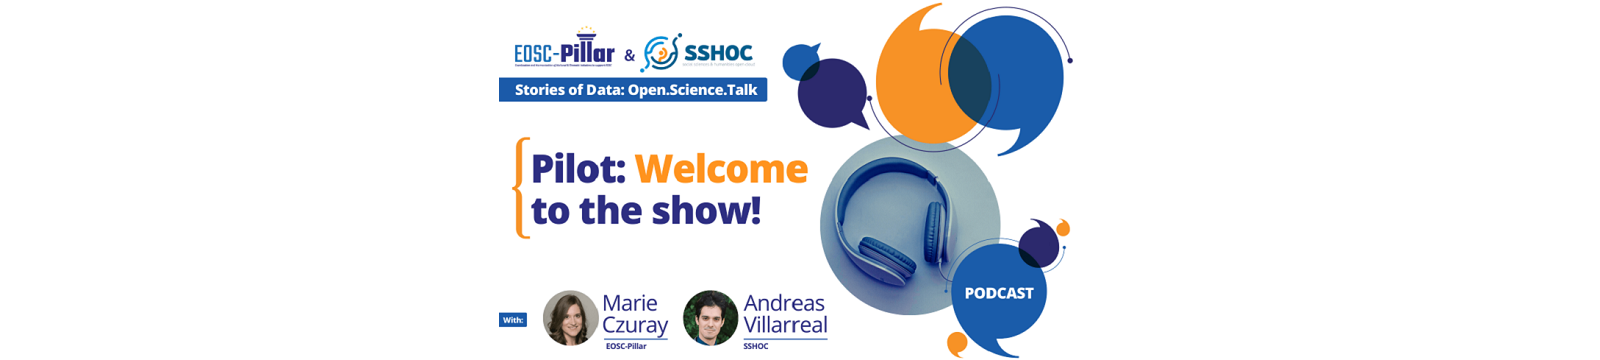 Stories of data, the Open Science Talk' podcast series to get to know EOSC better